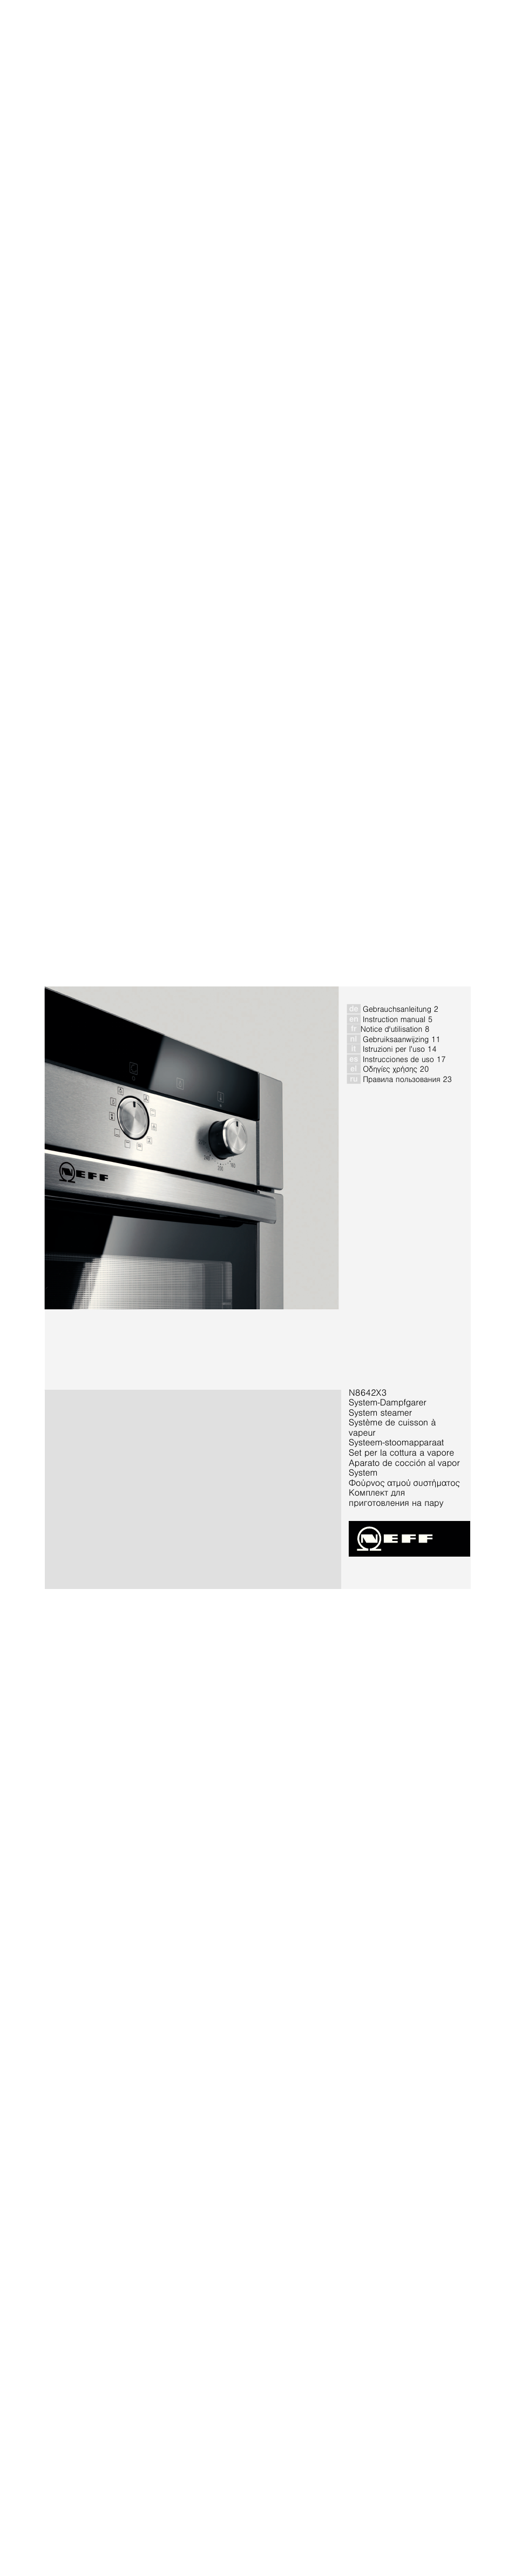 Neff N8642X3 User Manual | 28 pages